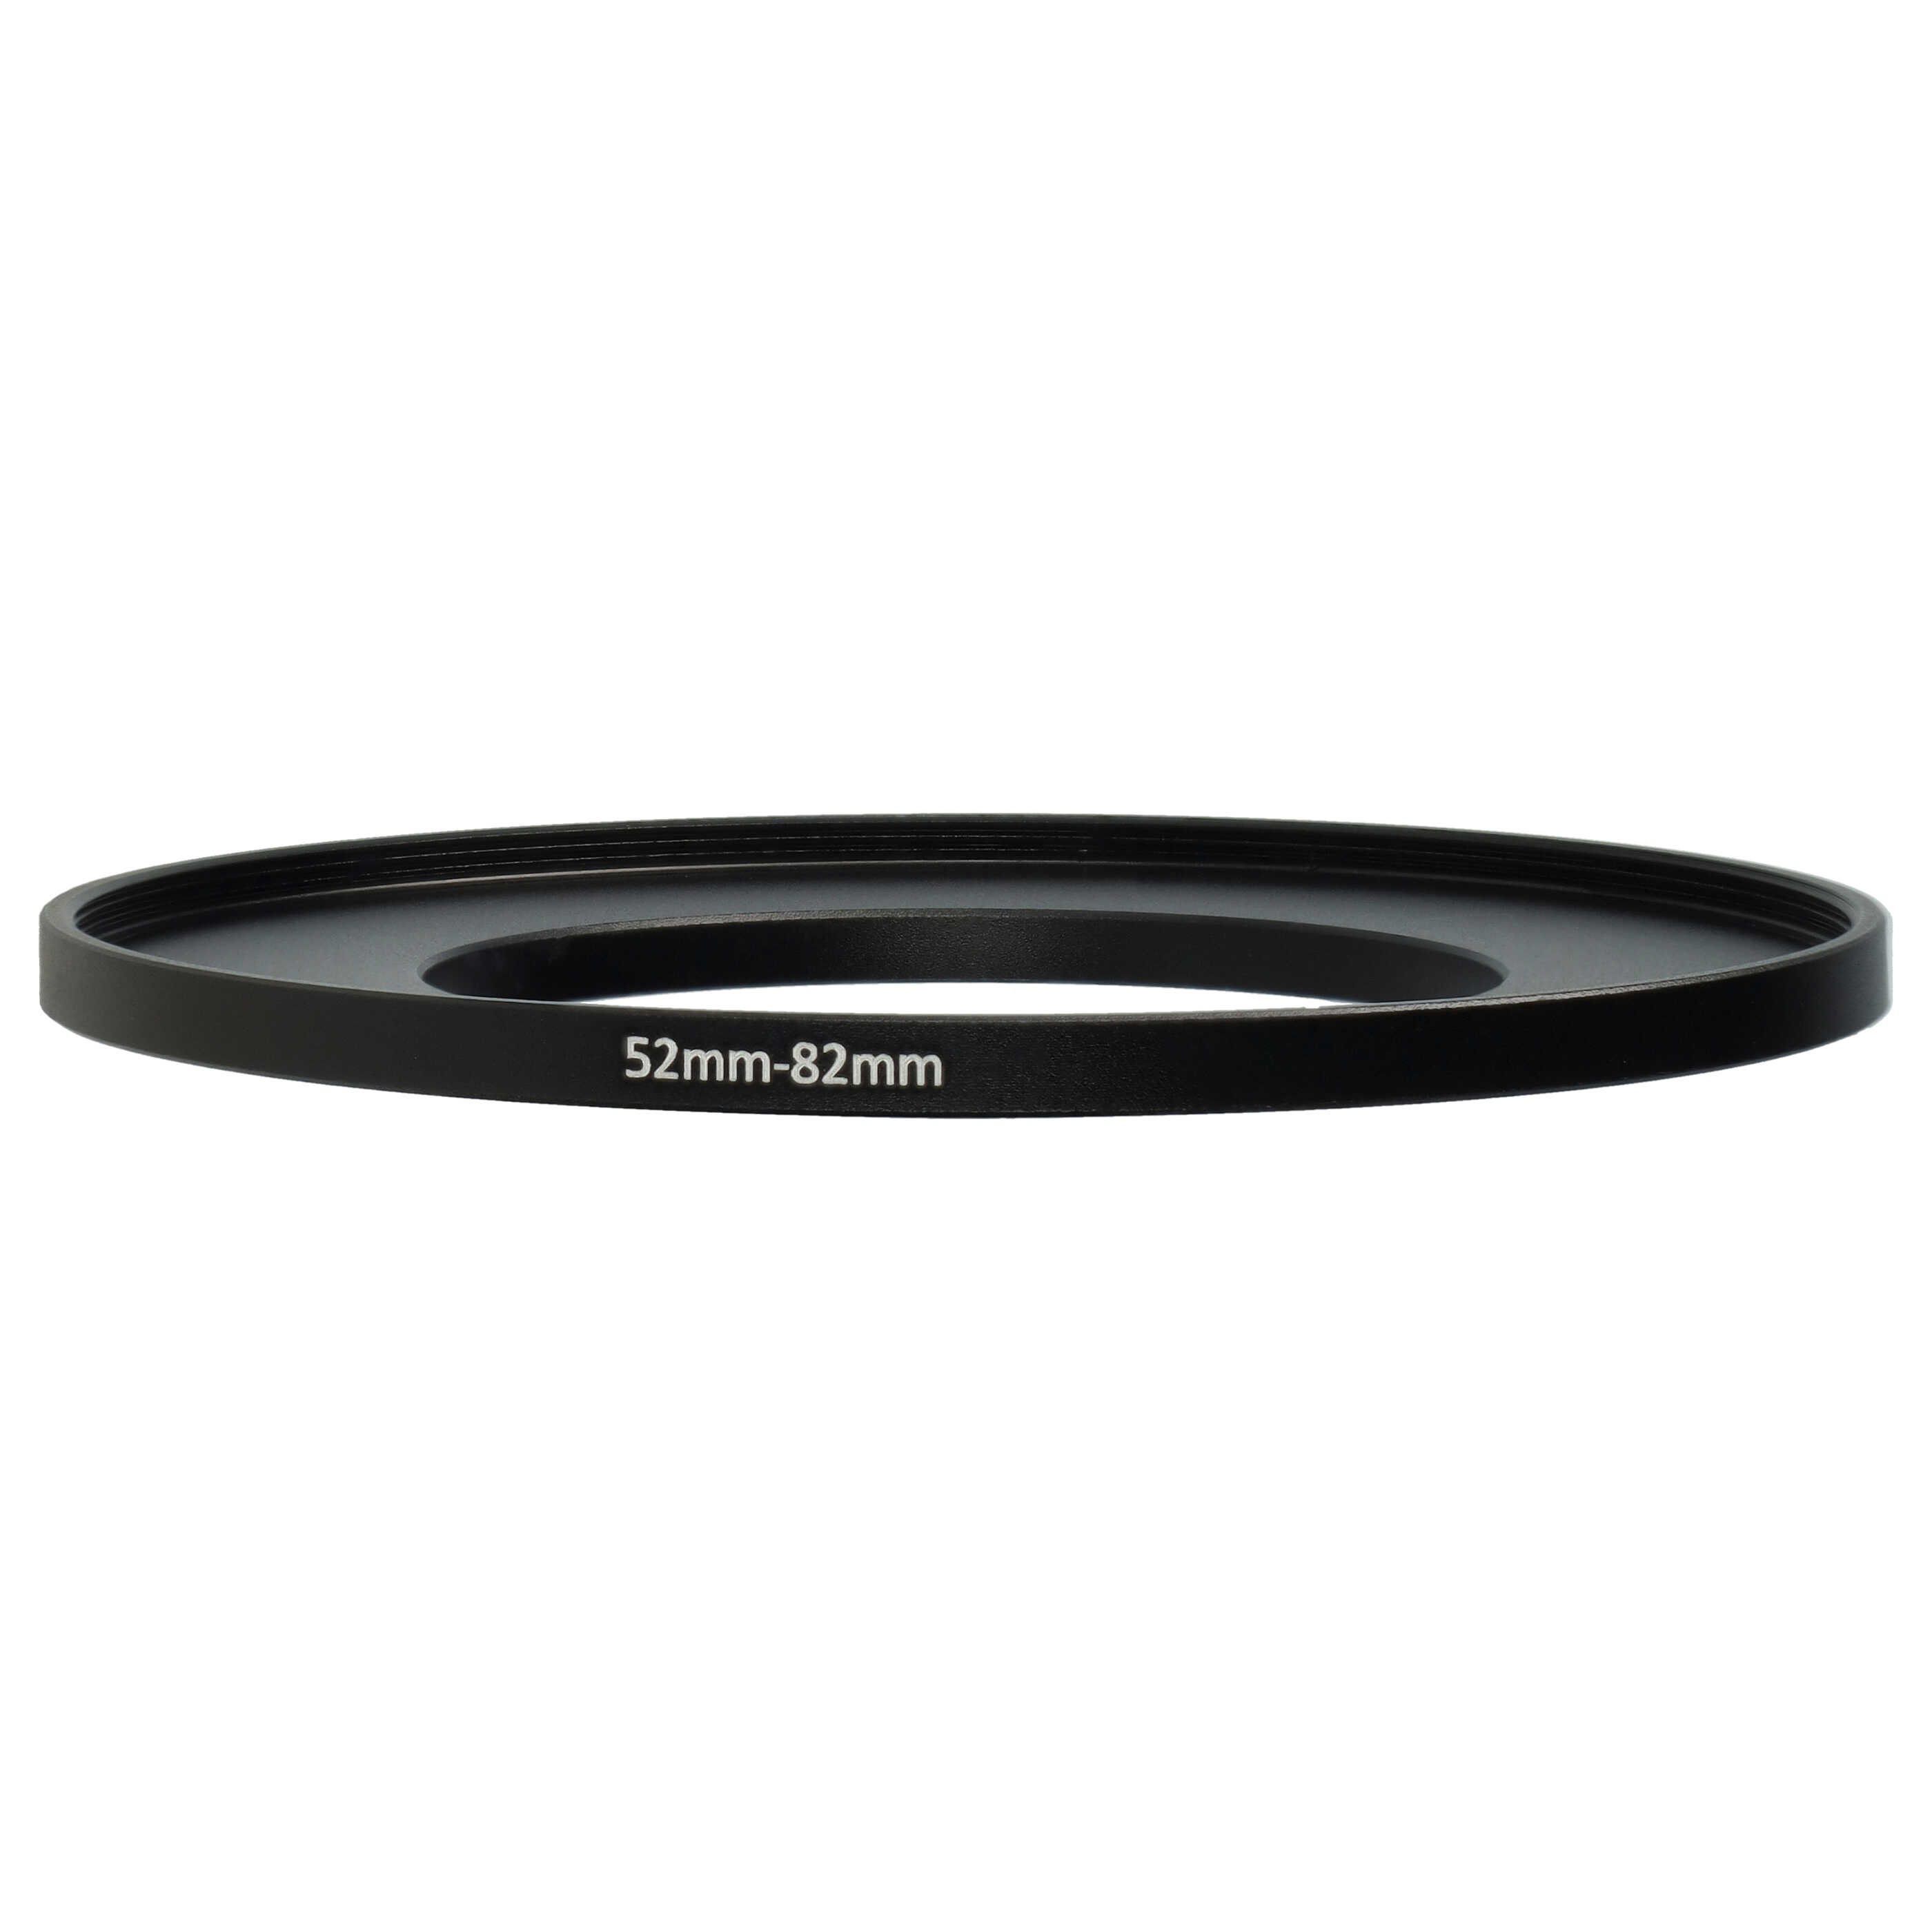 Step-Up Ring Adapter of 52 mm to 82 mmfor various Camera Lens - Filter Adapter